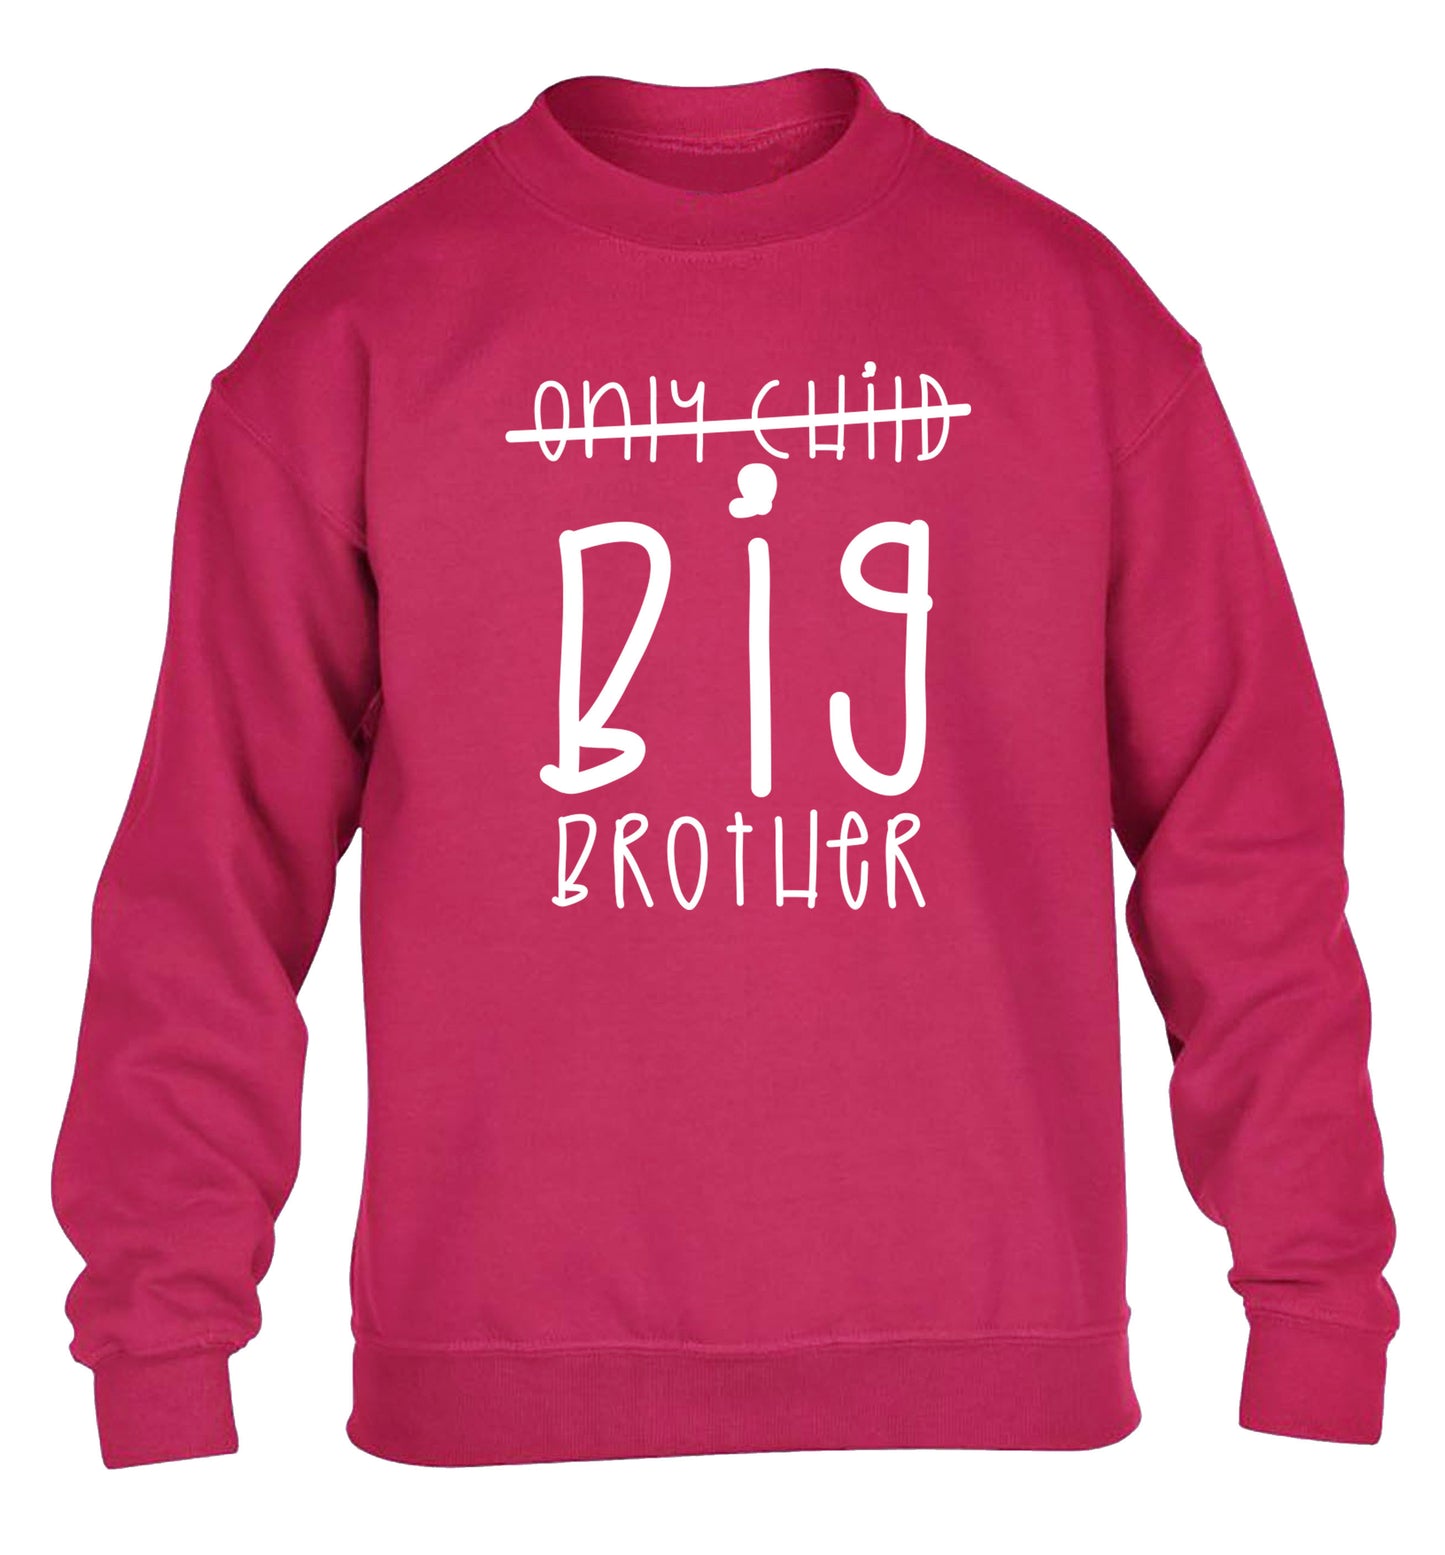 Only child big brother children's pink sweater 12-14 Years